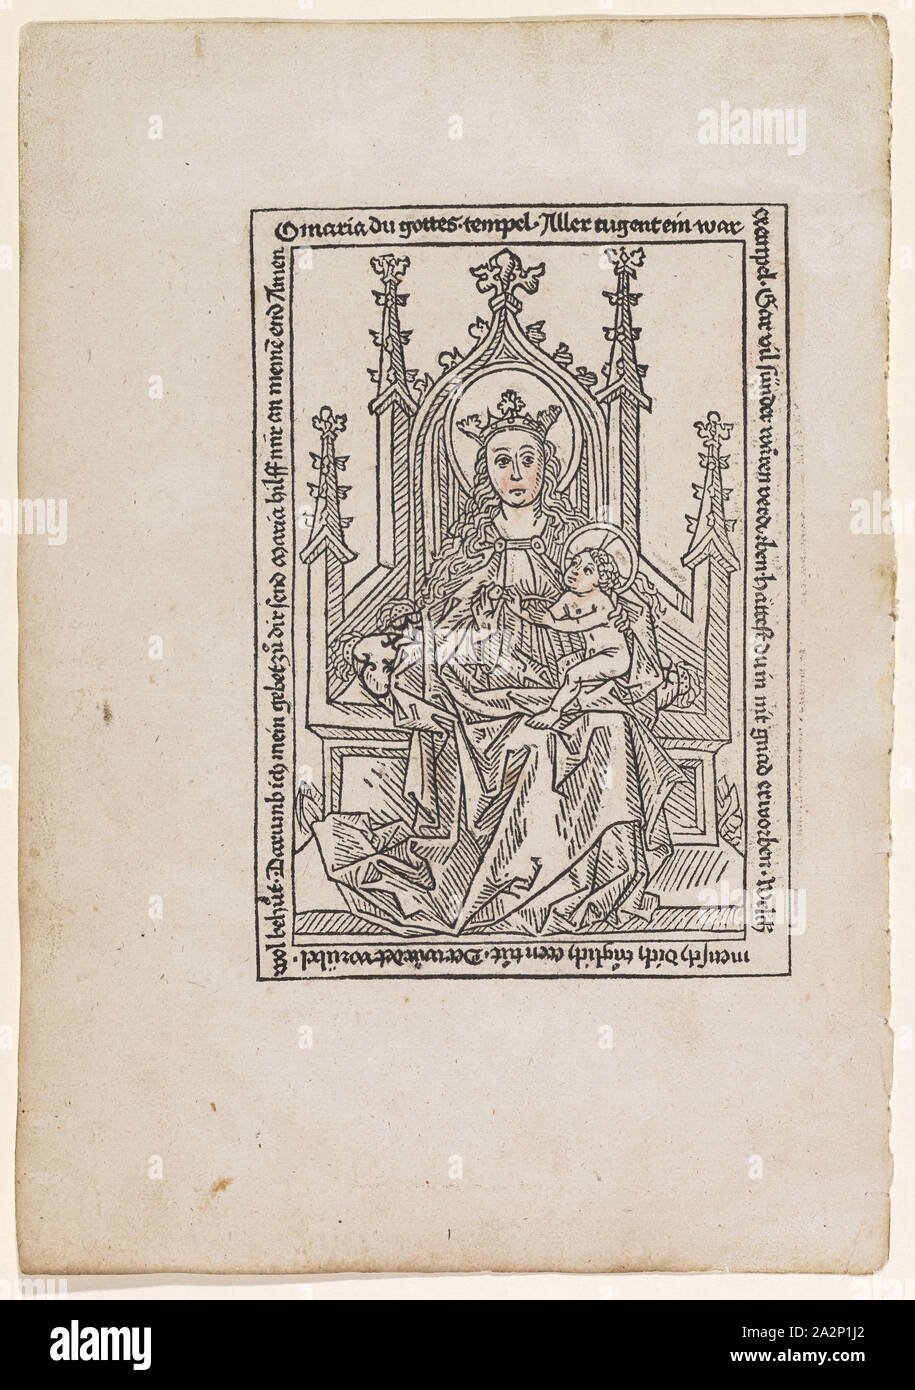 Enthroned Virgin Mary with Child, 2nd half of the 15th century, woodcut, partially colored, page: 30.5 x 21.4 cm |, Picture: 18.8 x 13 cm, inscribed: O maria du gottes., temple., All tugent a, was., Gar vil sinners would be spoiled., would you have bought in nit gnad., Which one does you do?, He would guard against evil., Darumb I send my prayer to you Maria help me to my end Amen, Anonym, Süddeutschland (Augsburg), 2. Hälfte 15. Jh Stock Photo